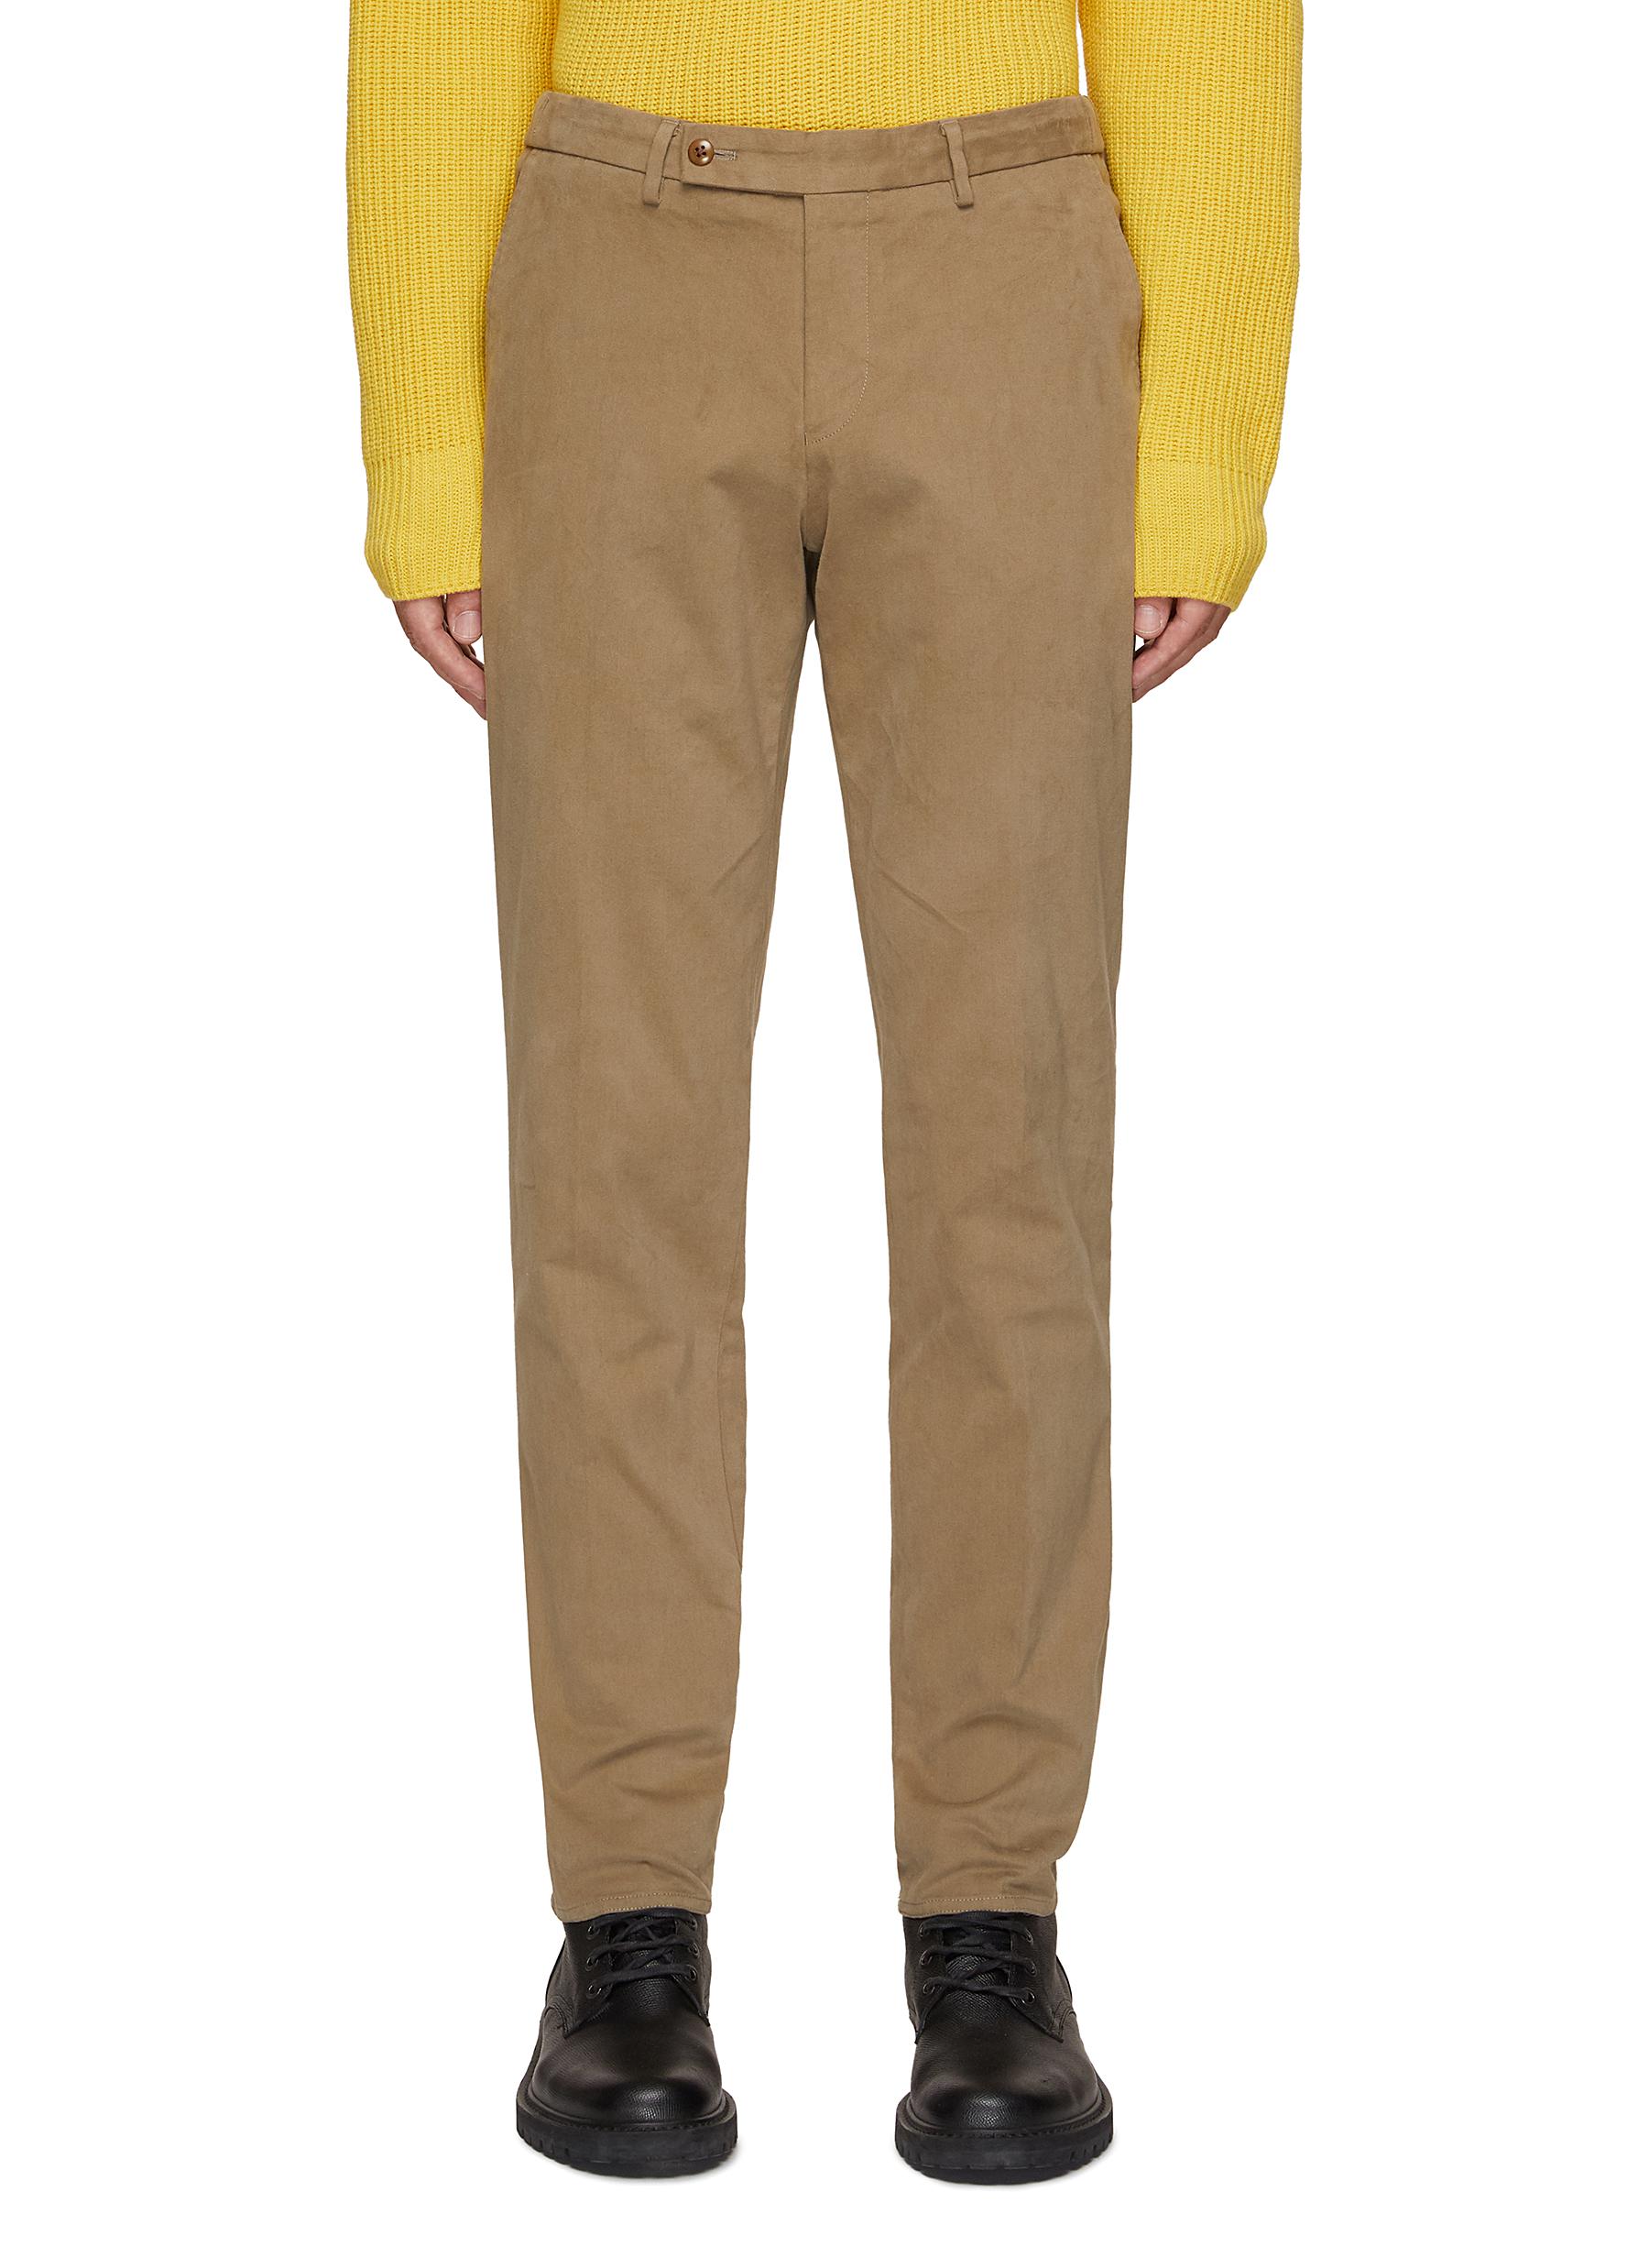 ASOS Slim Chinos In Yellow | Mens yellow pants, Jeans outfit men, White jeans  men